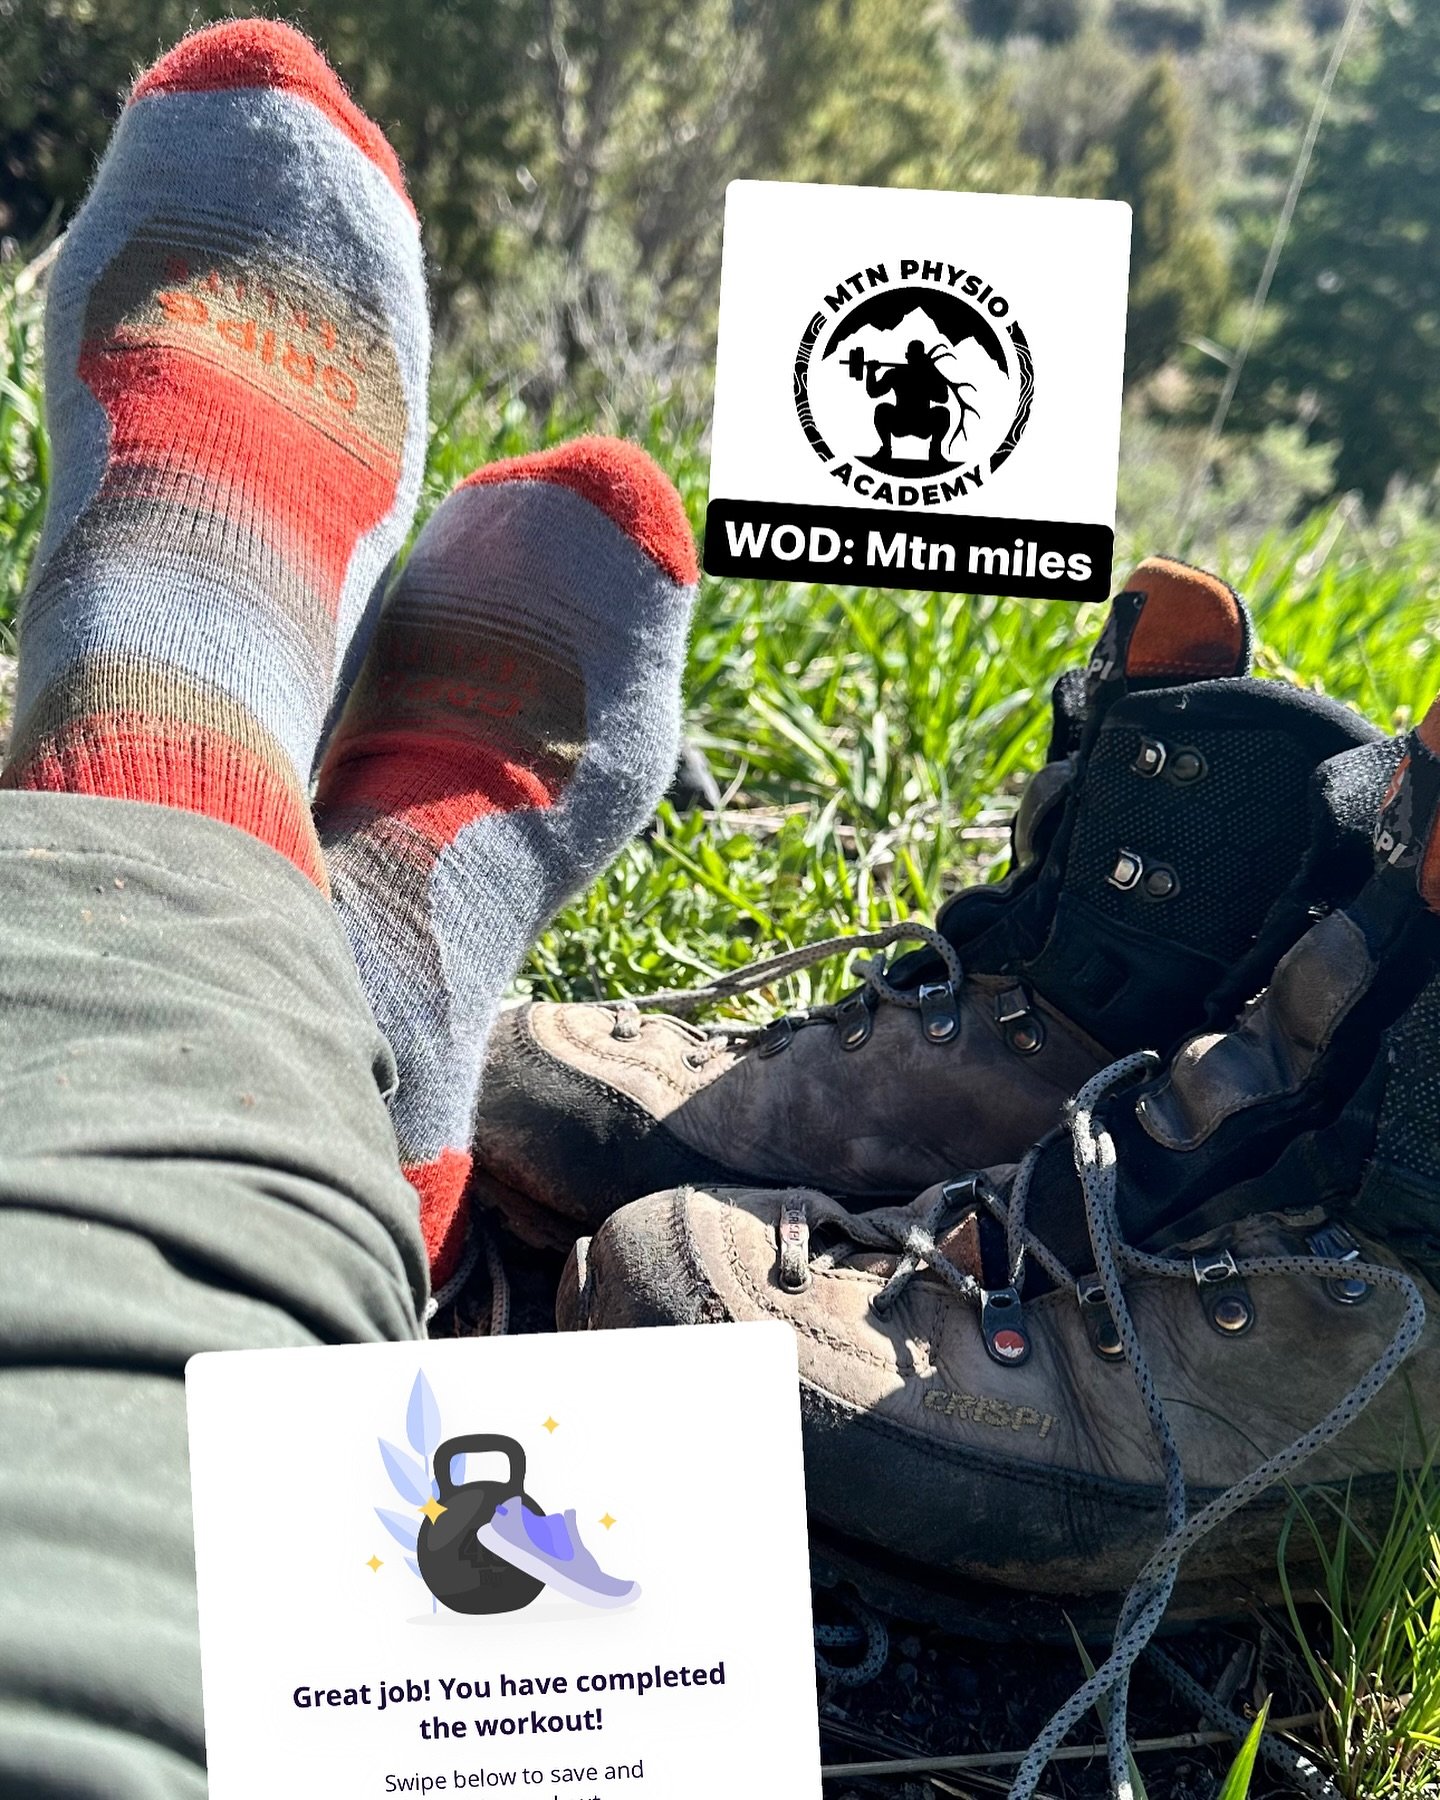 You get some MTN MILES in today? 

The goal today was 2 hours&hellip;. How did you switch it up? Did you throw weight in a pack? Did you just enjoy a good hike? Did you ride a bike? Were you shed hunting, bear hunting or turkey hunting? Did you go wi